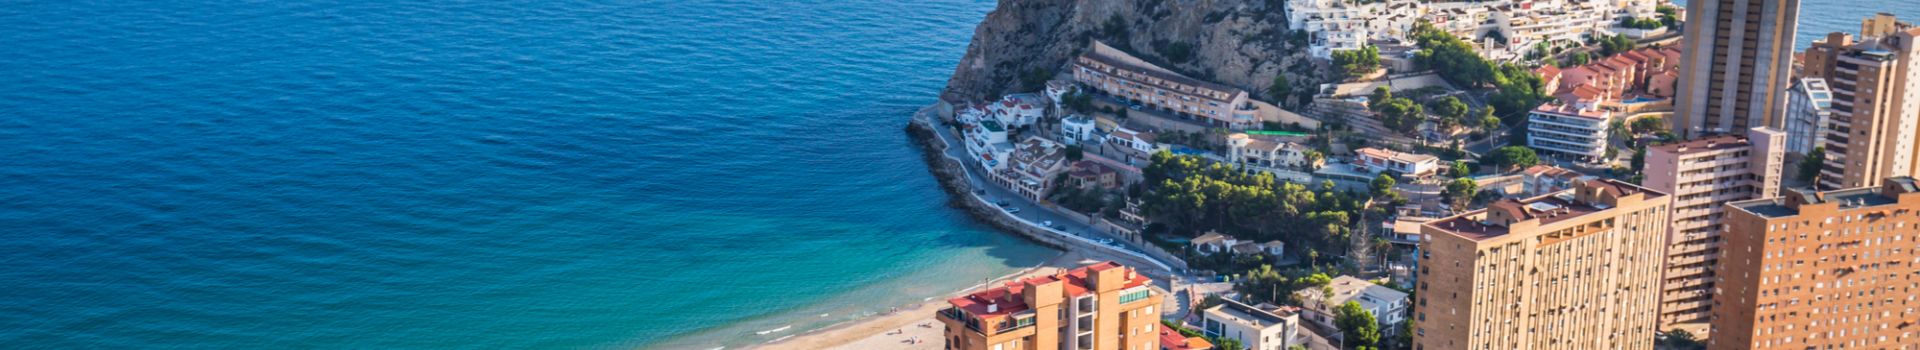 Cheap holidays to Benidorm from Belfast - Cassidy Travel